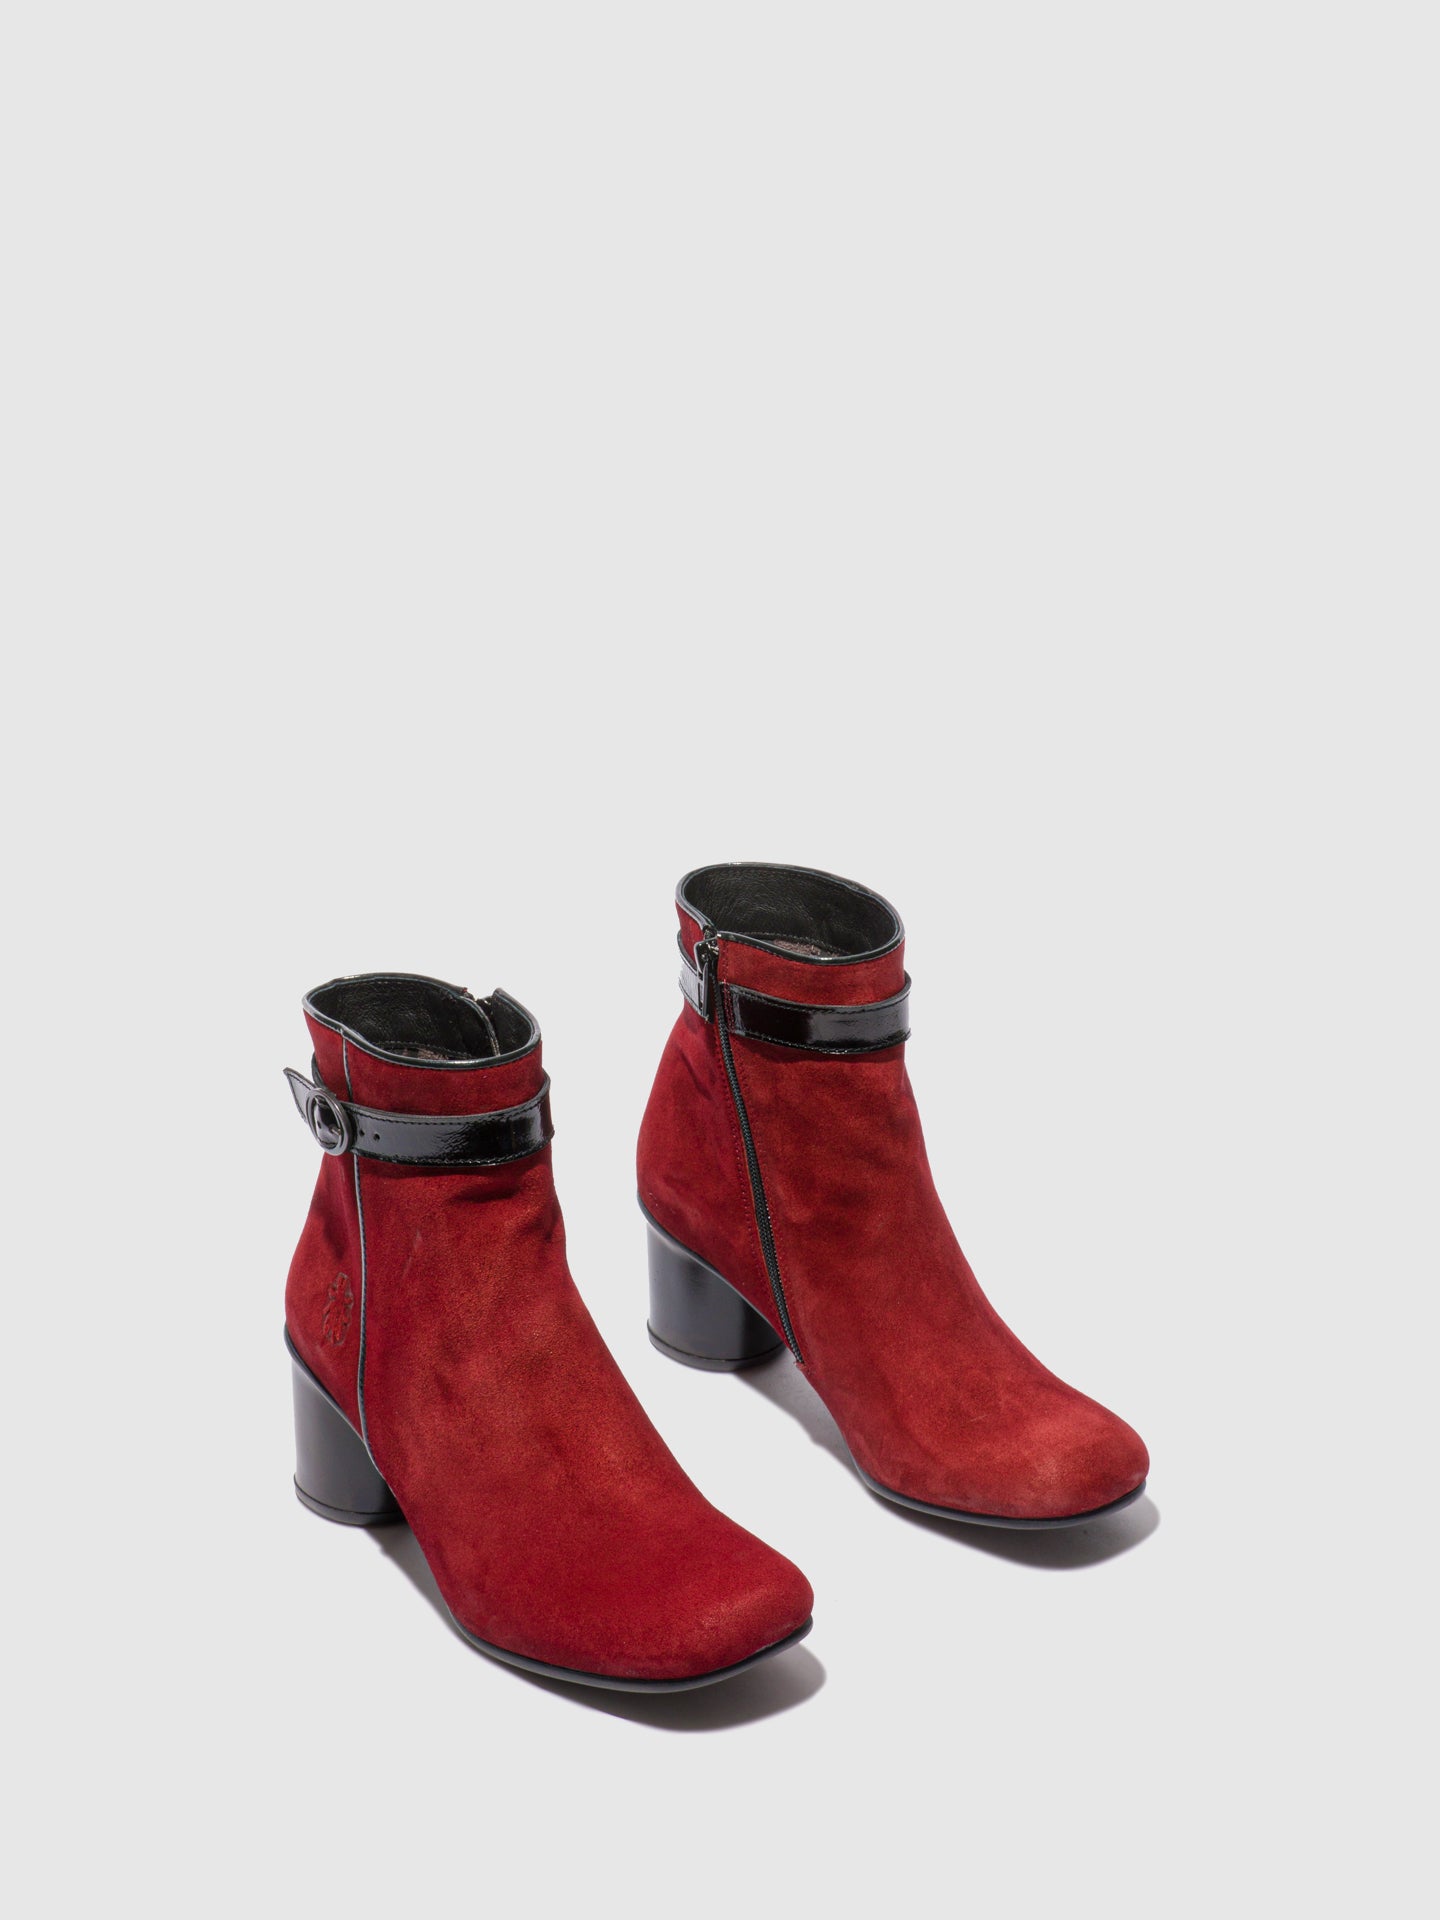 Fly London Zip Up Ankle Boots SAKO810FLY RANCH/LUXOR DK RED/BLACK